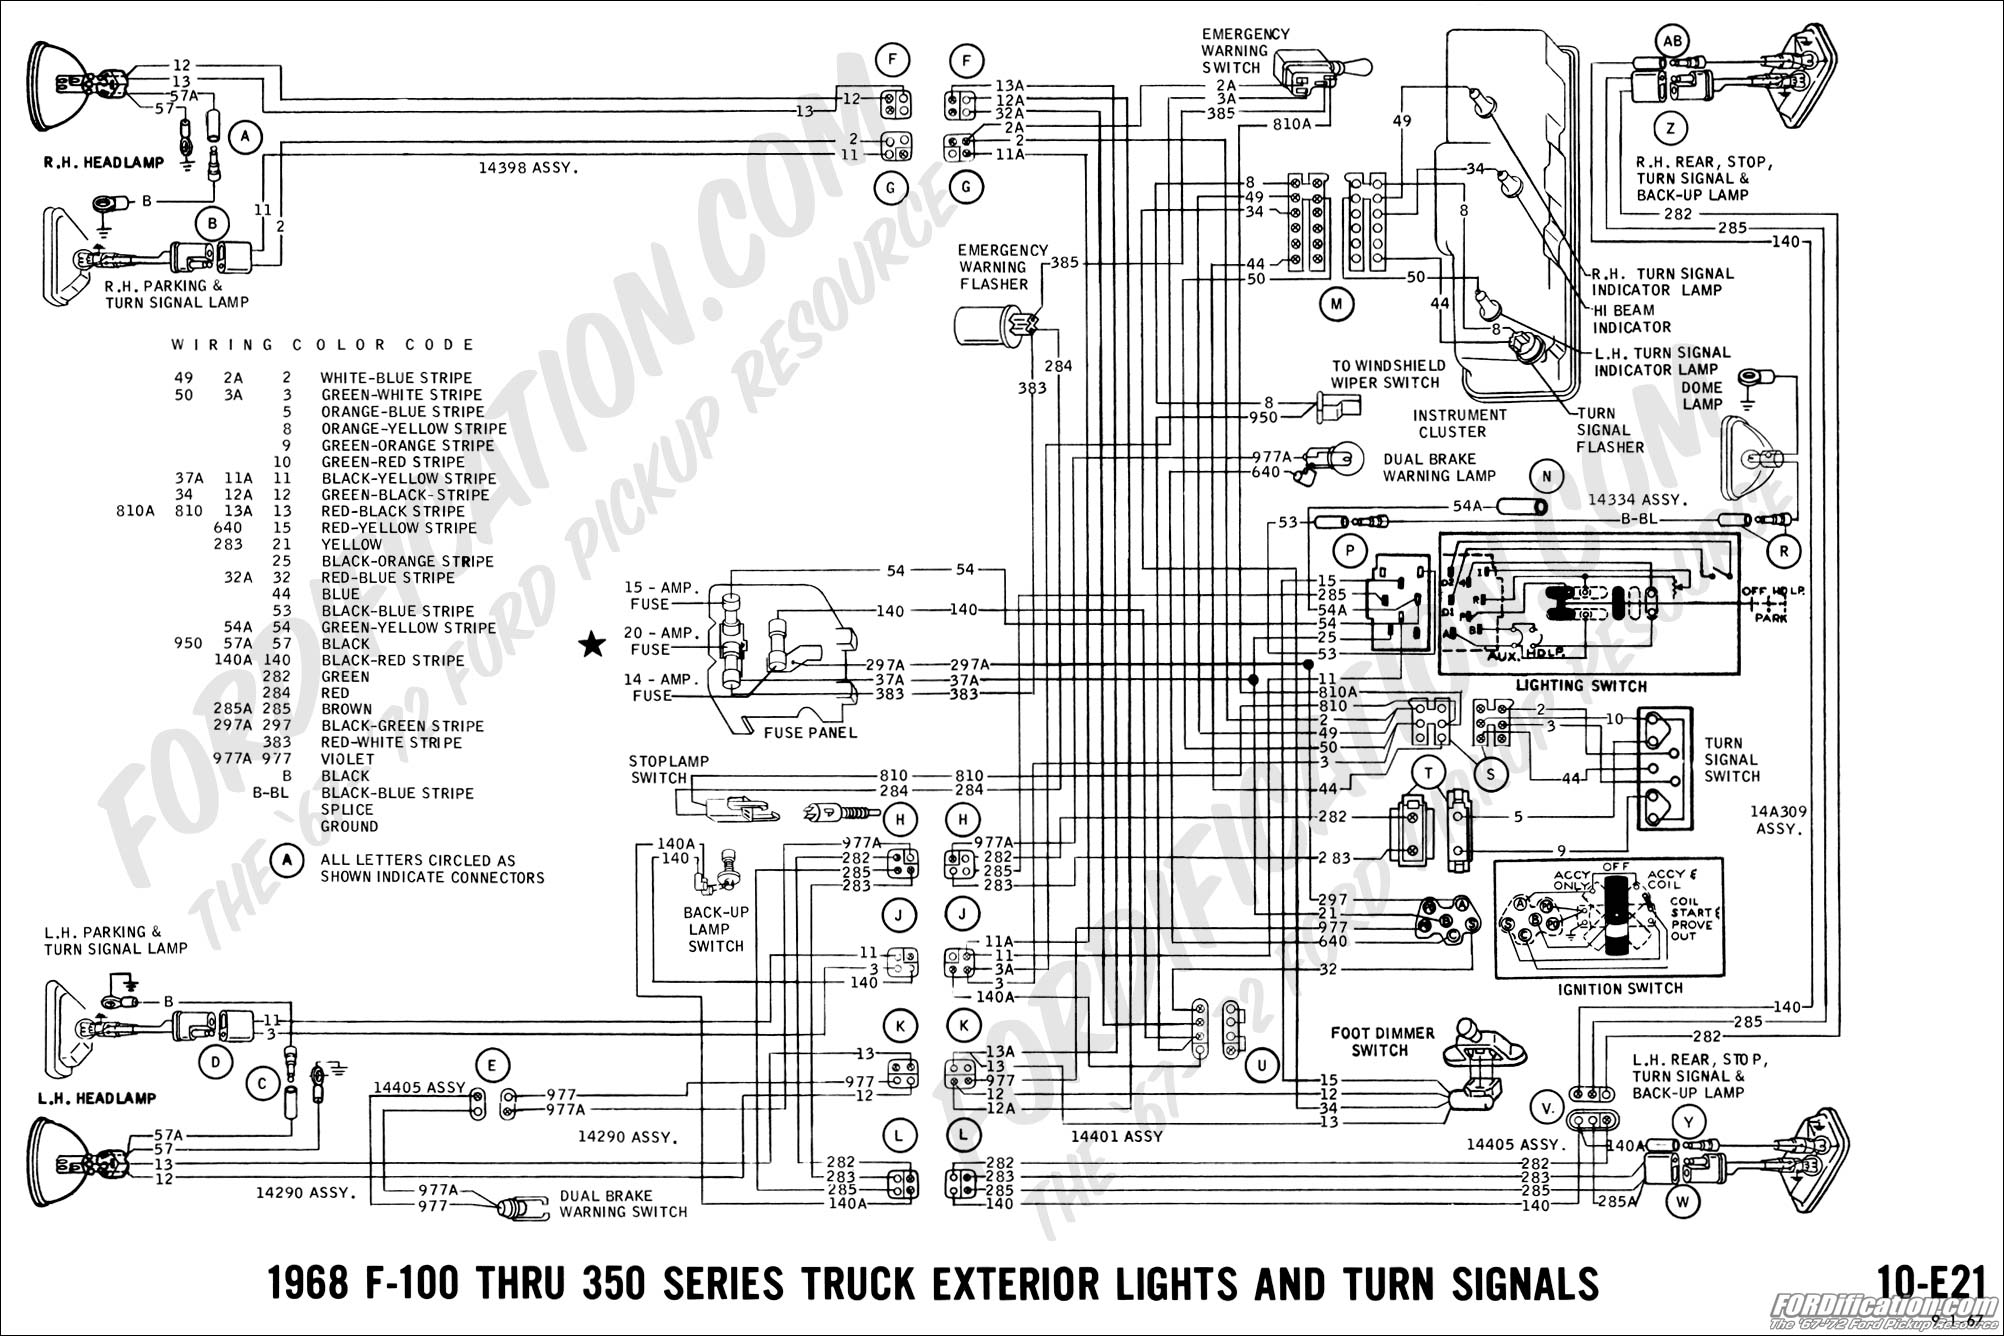 1968 F100 Turn Signals - working like hazards - Ford Truck Enthusiasts